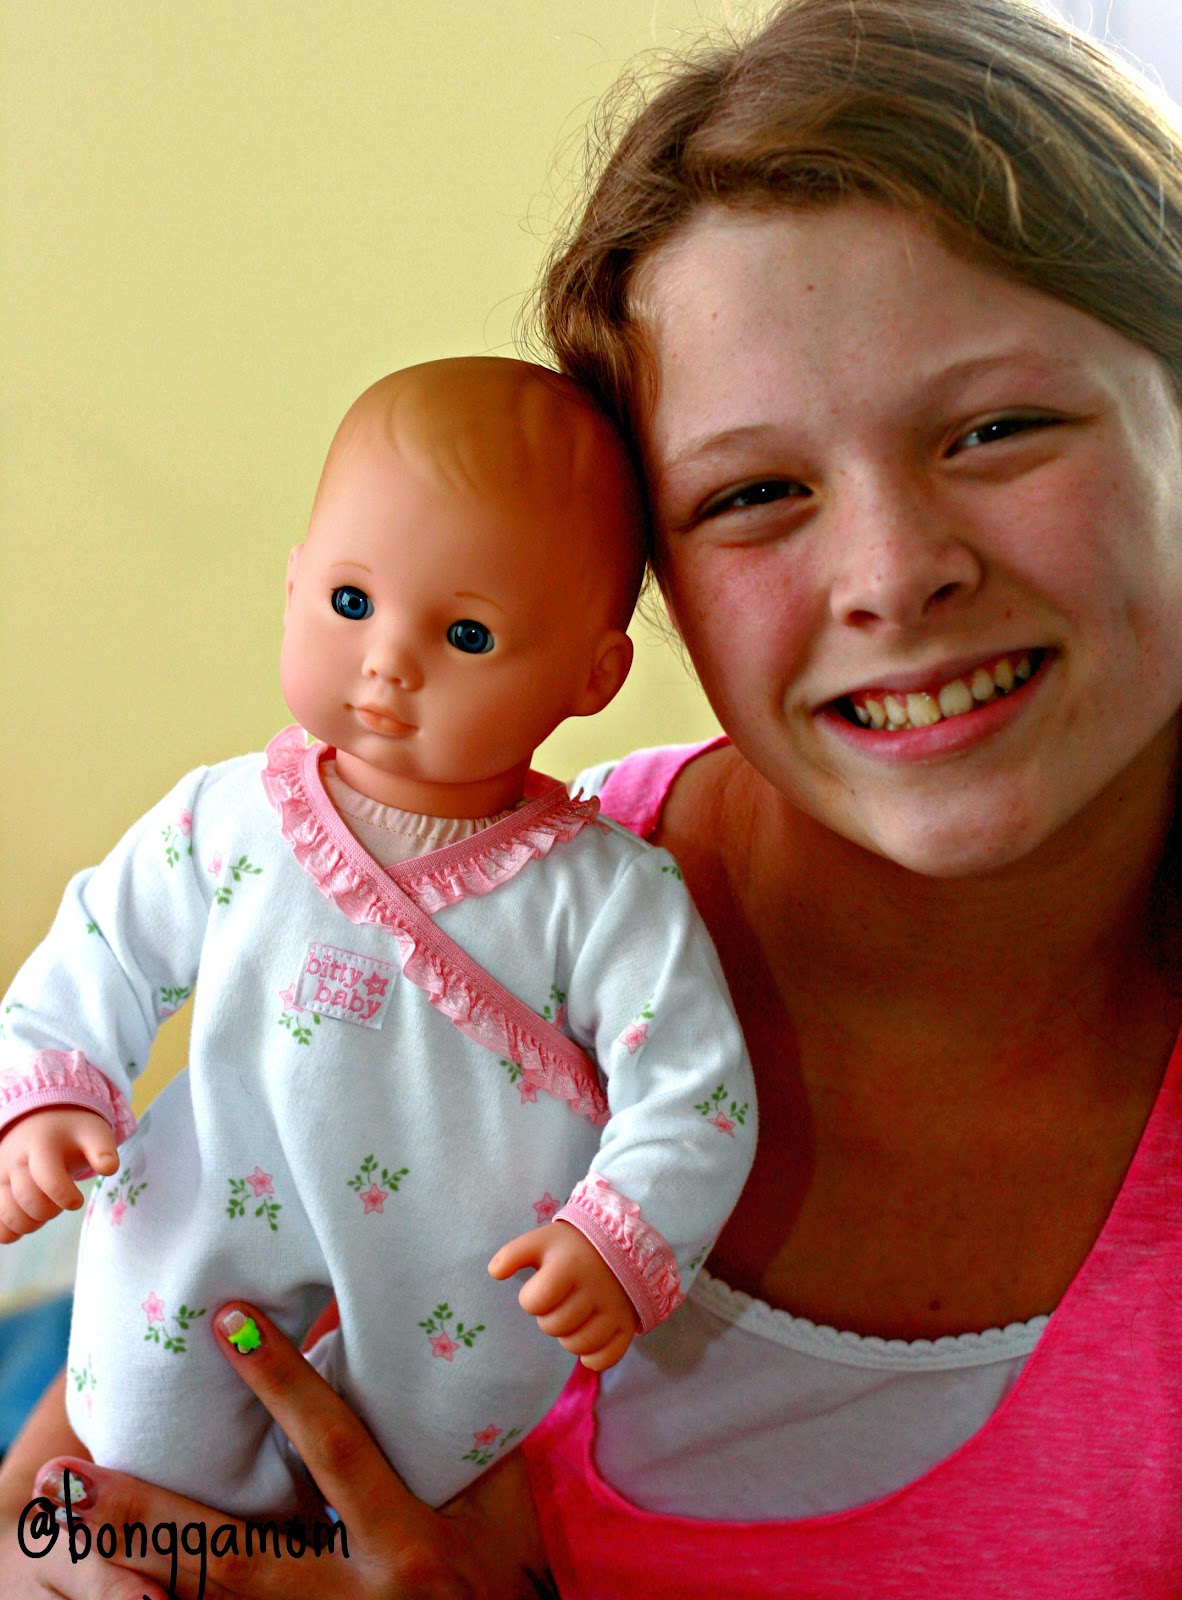 Bonggamom Finds: American Girl launches their expanded, revamped Bitty